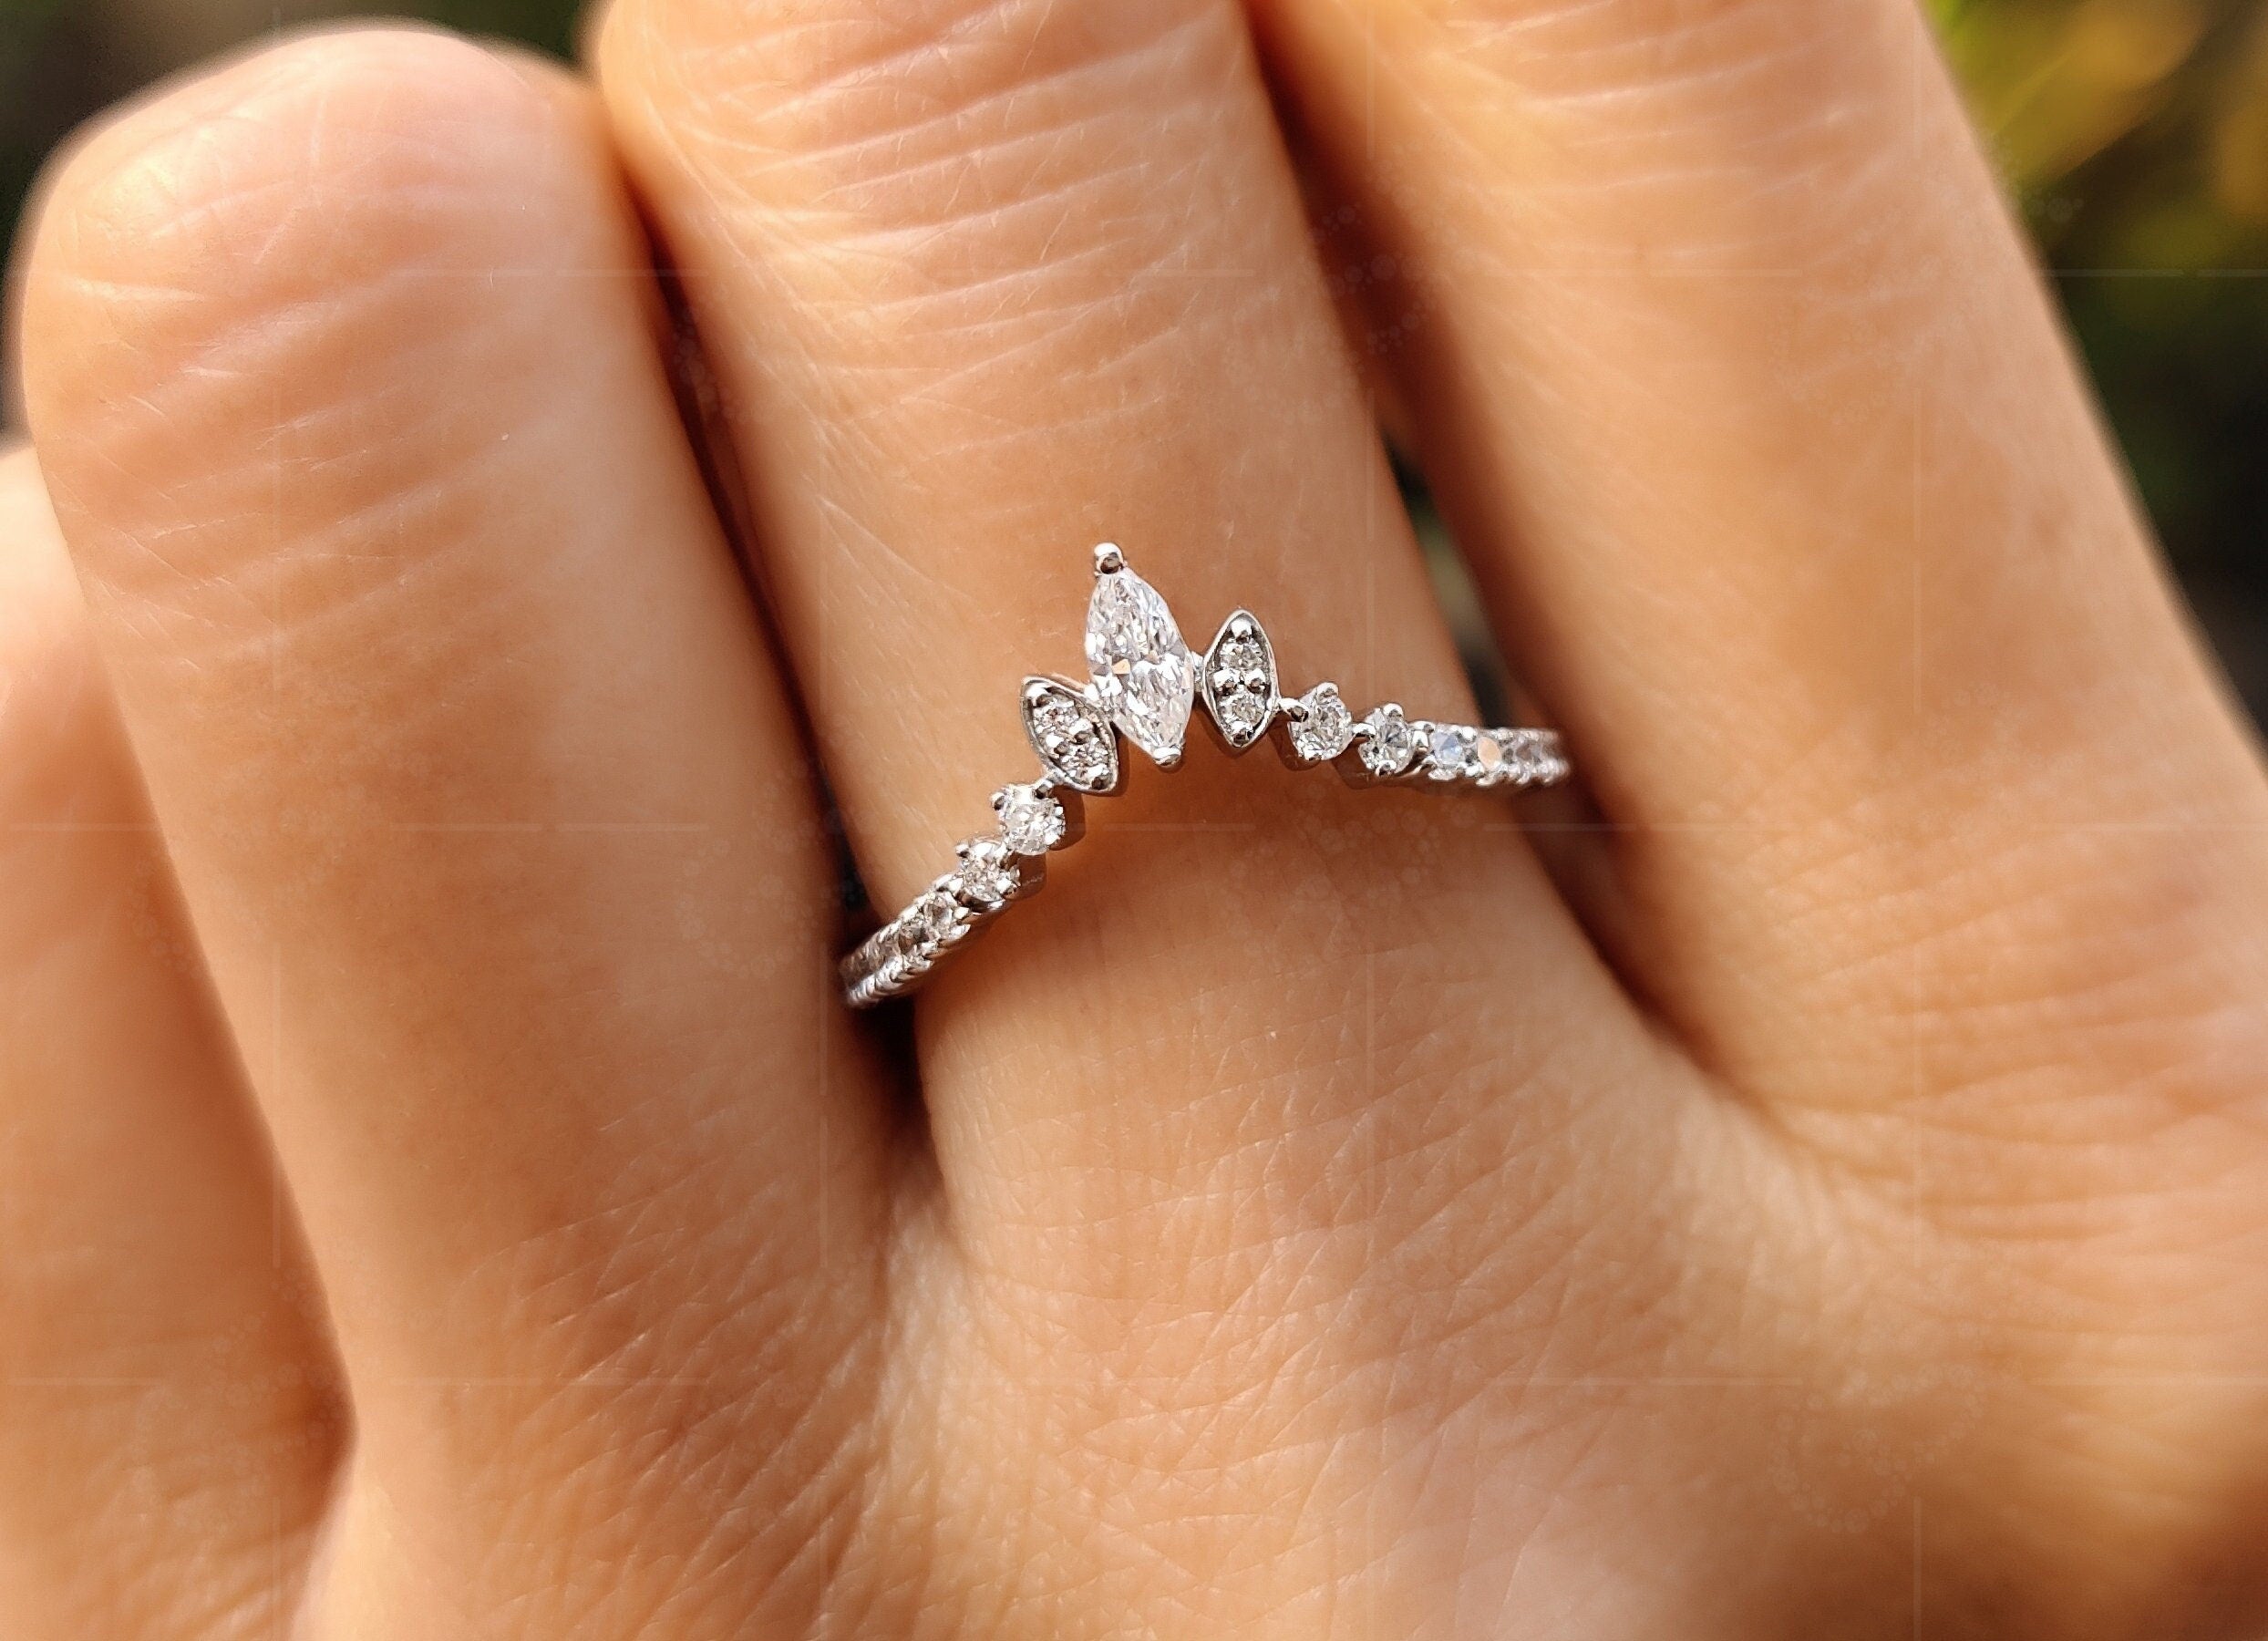 Delicate Chevron V-Shape Moissanite Curved Wedding Ring in Silver and White Gold – A Promise of Elegance and Grace